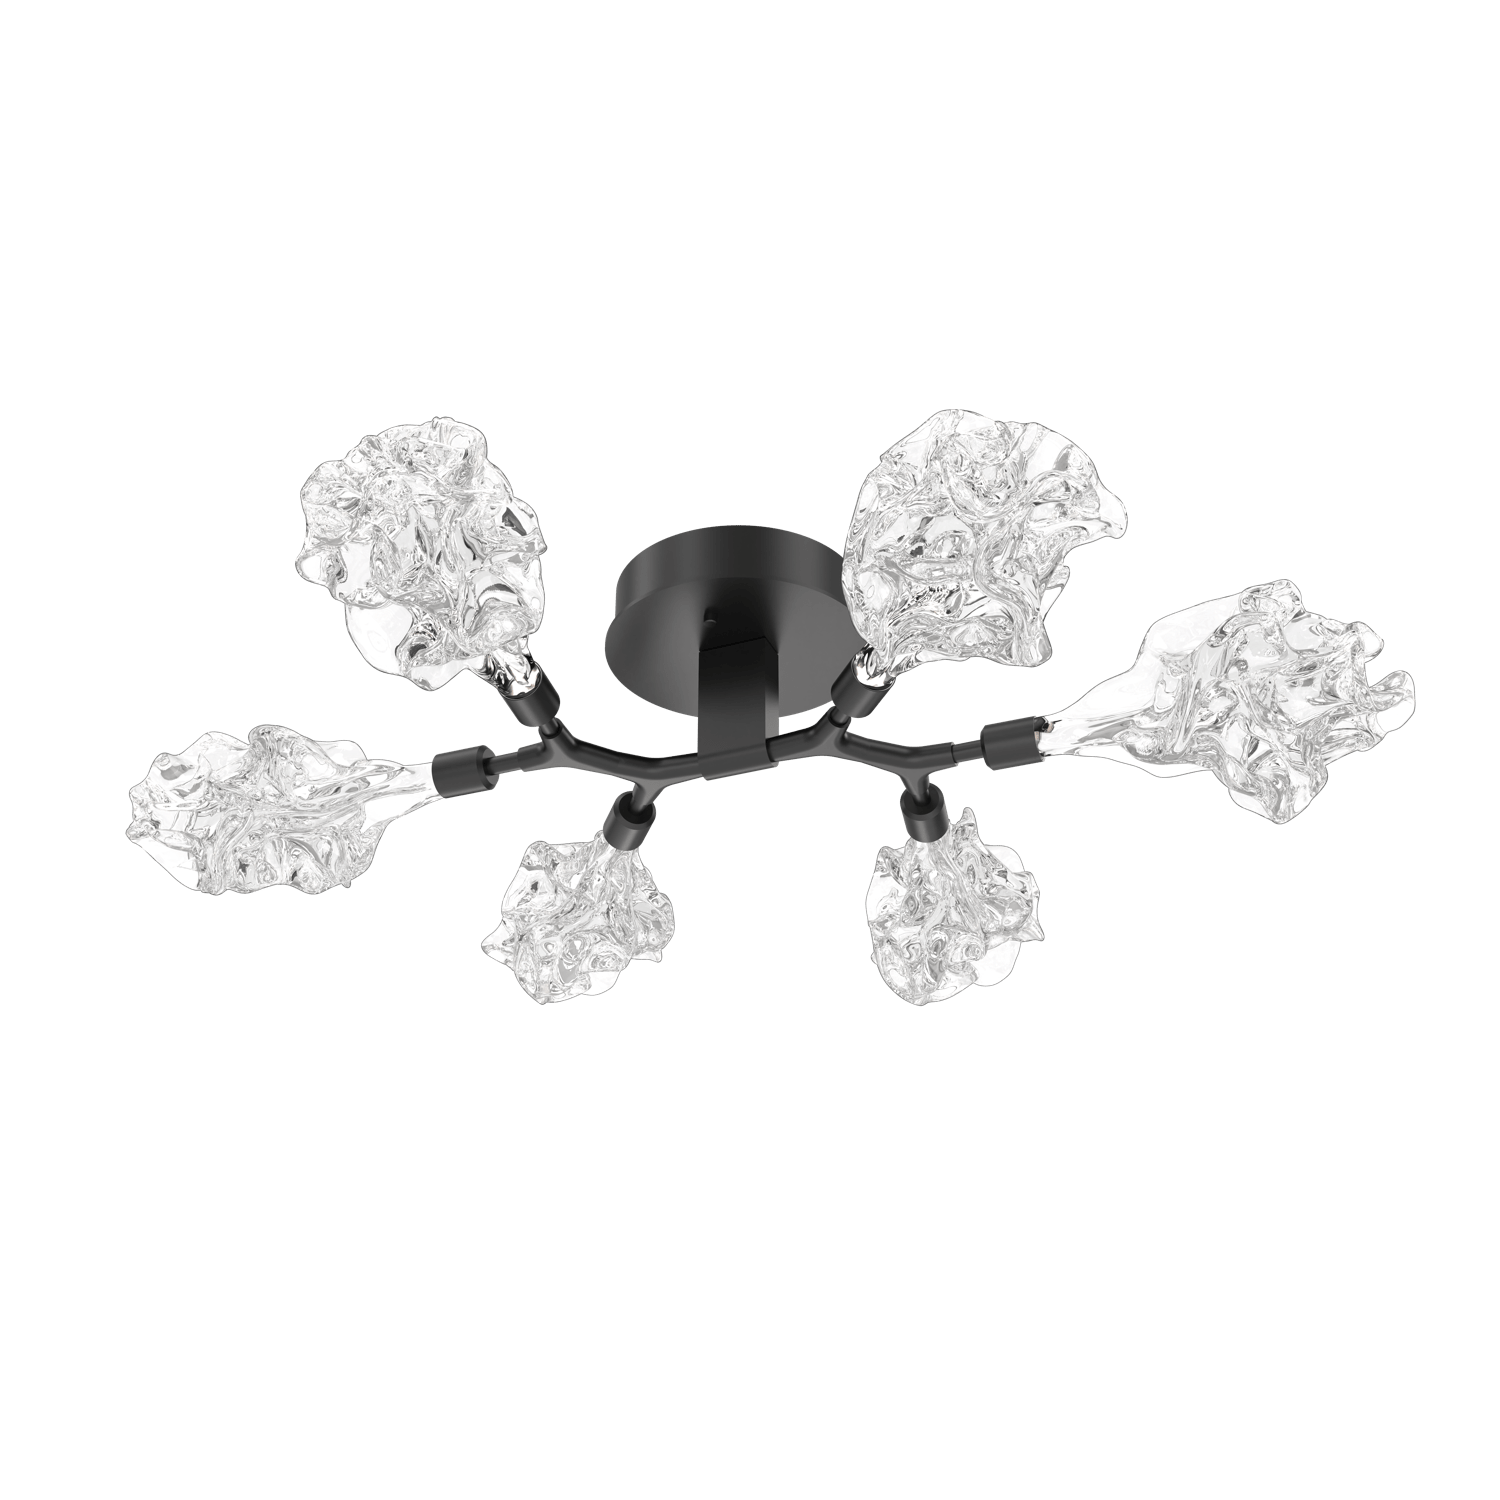 CLB0059-01-MB-Hammerton-Studio-Blossom-6-light-organic-flush-mount-light-with-matte-black-finish-and-clear-handblown-crystal-glass-shades-and-LED-lamping